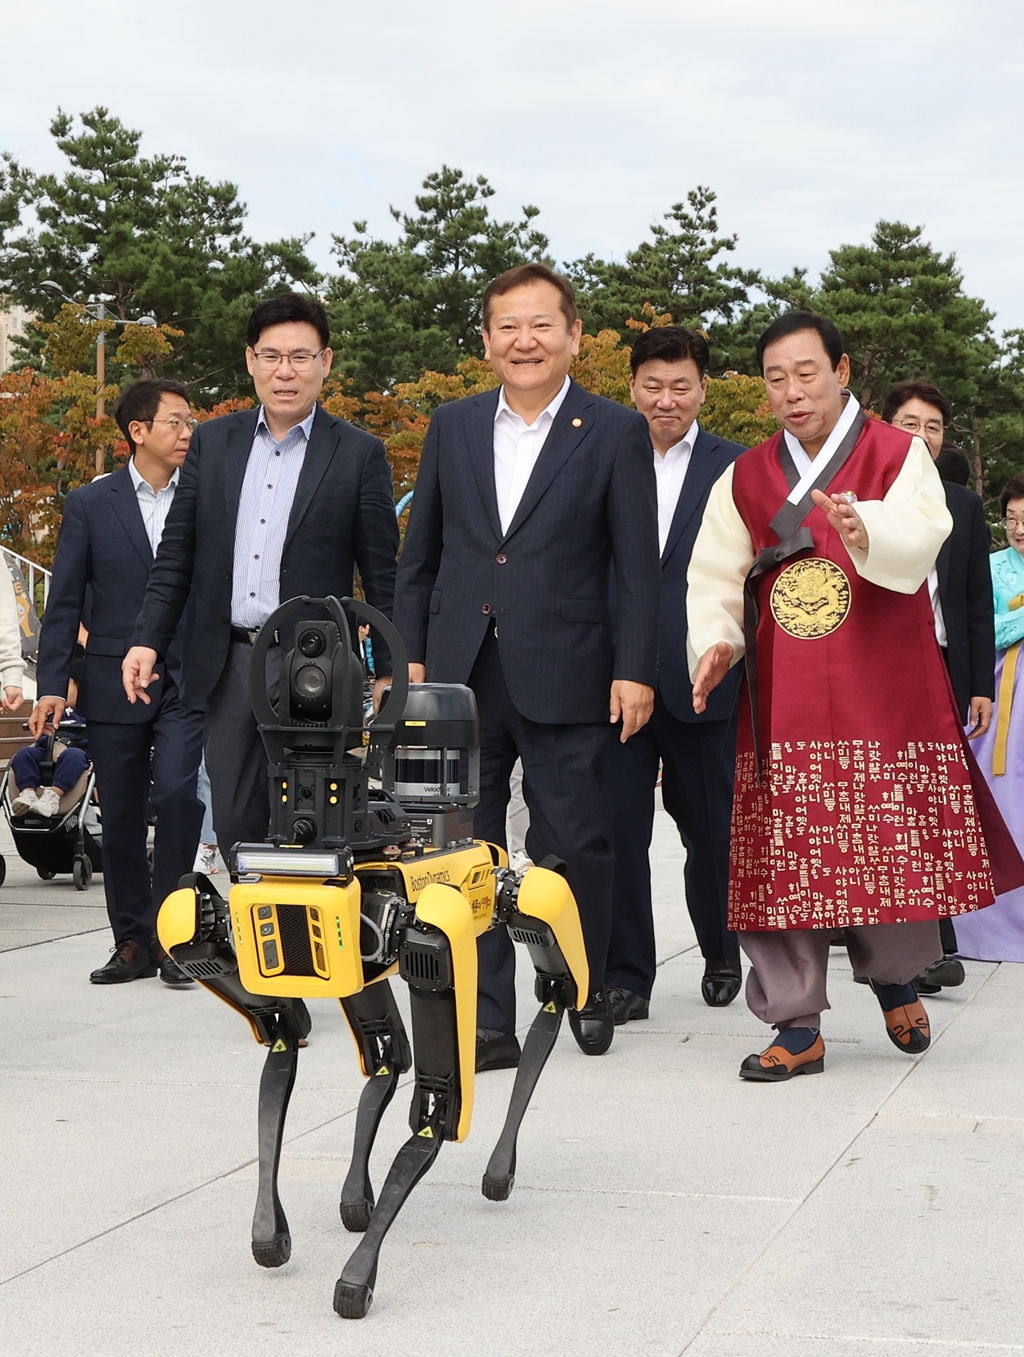 Minister of the Interior and Safety Lee Sang-min visits Sejong Central Park, where the Sejong Festival 2023 is being held in conjunction with Hangeul Day, and tours the venue while being guided by Spot, an autonomous patrol robot, on the morning of the 9th.